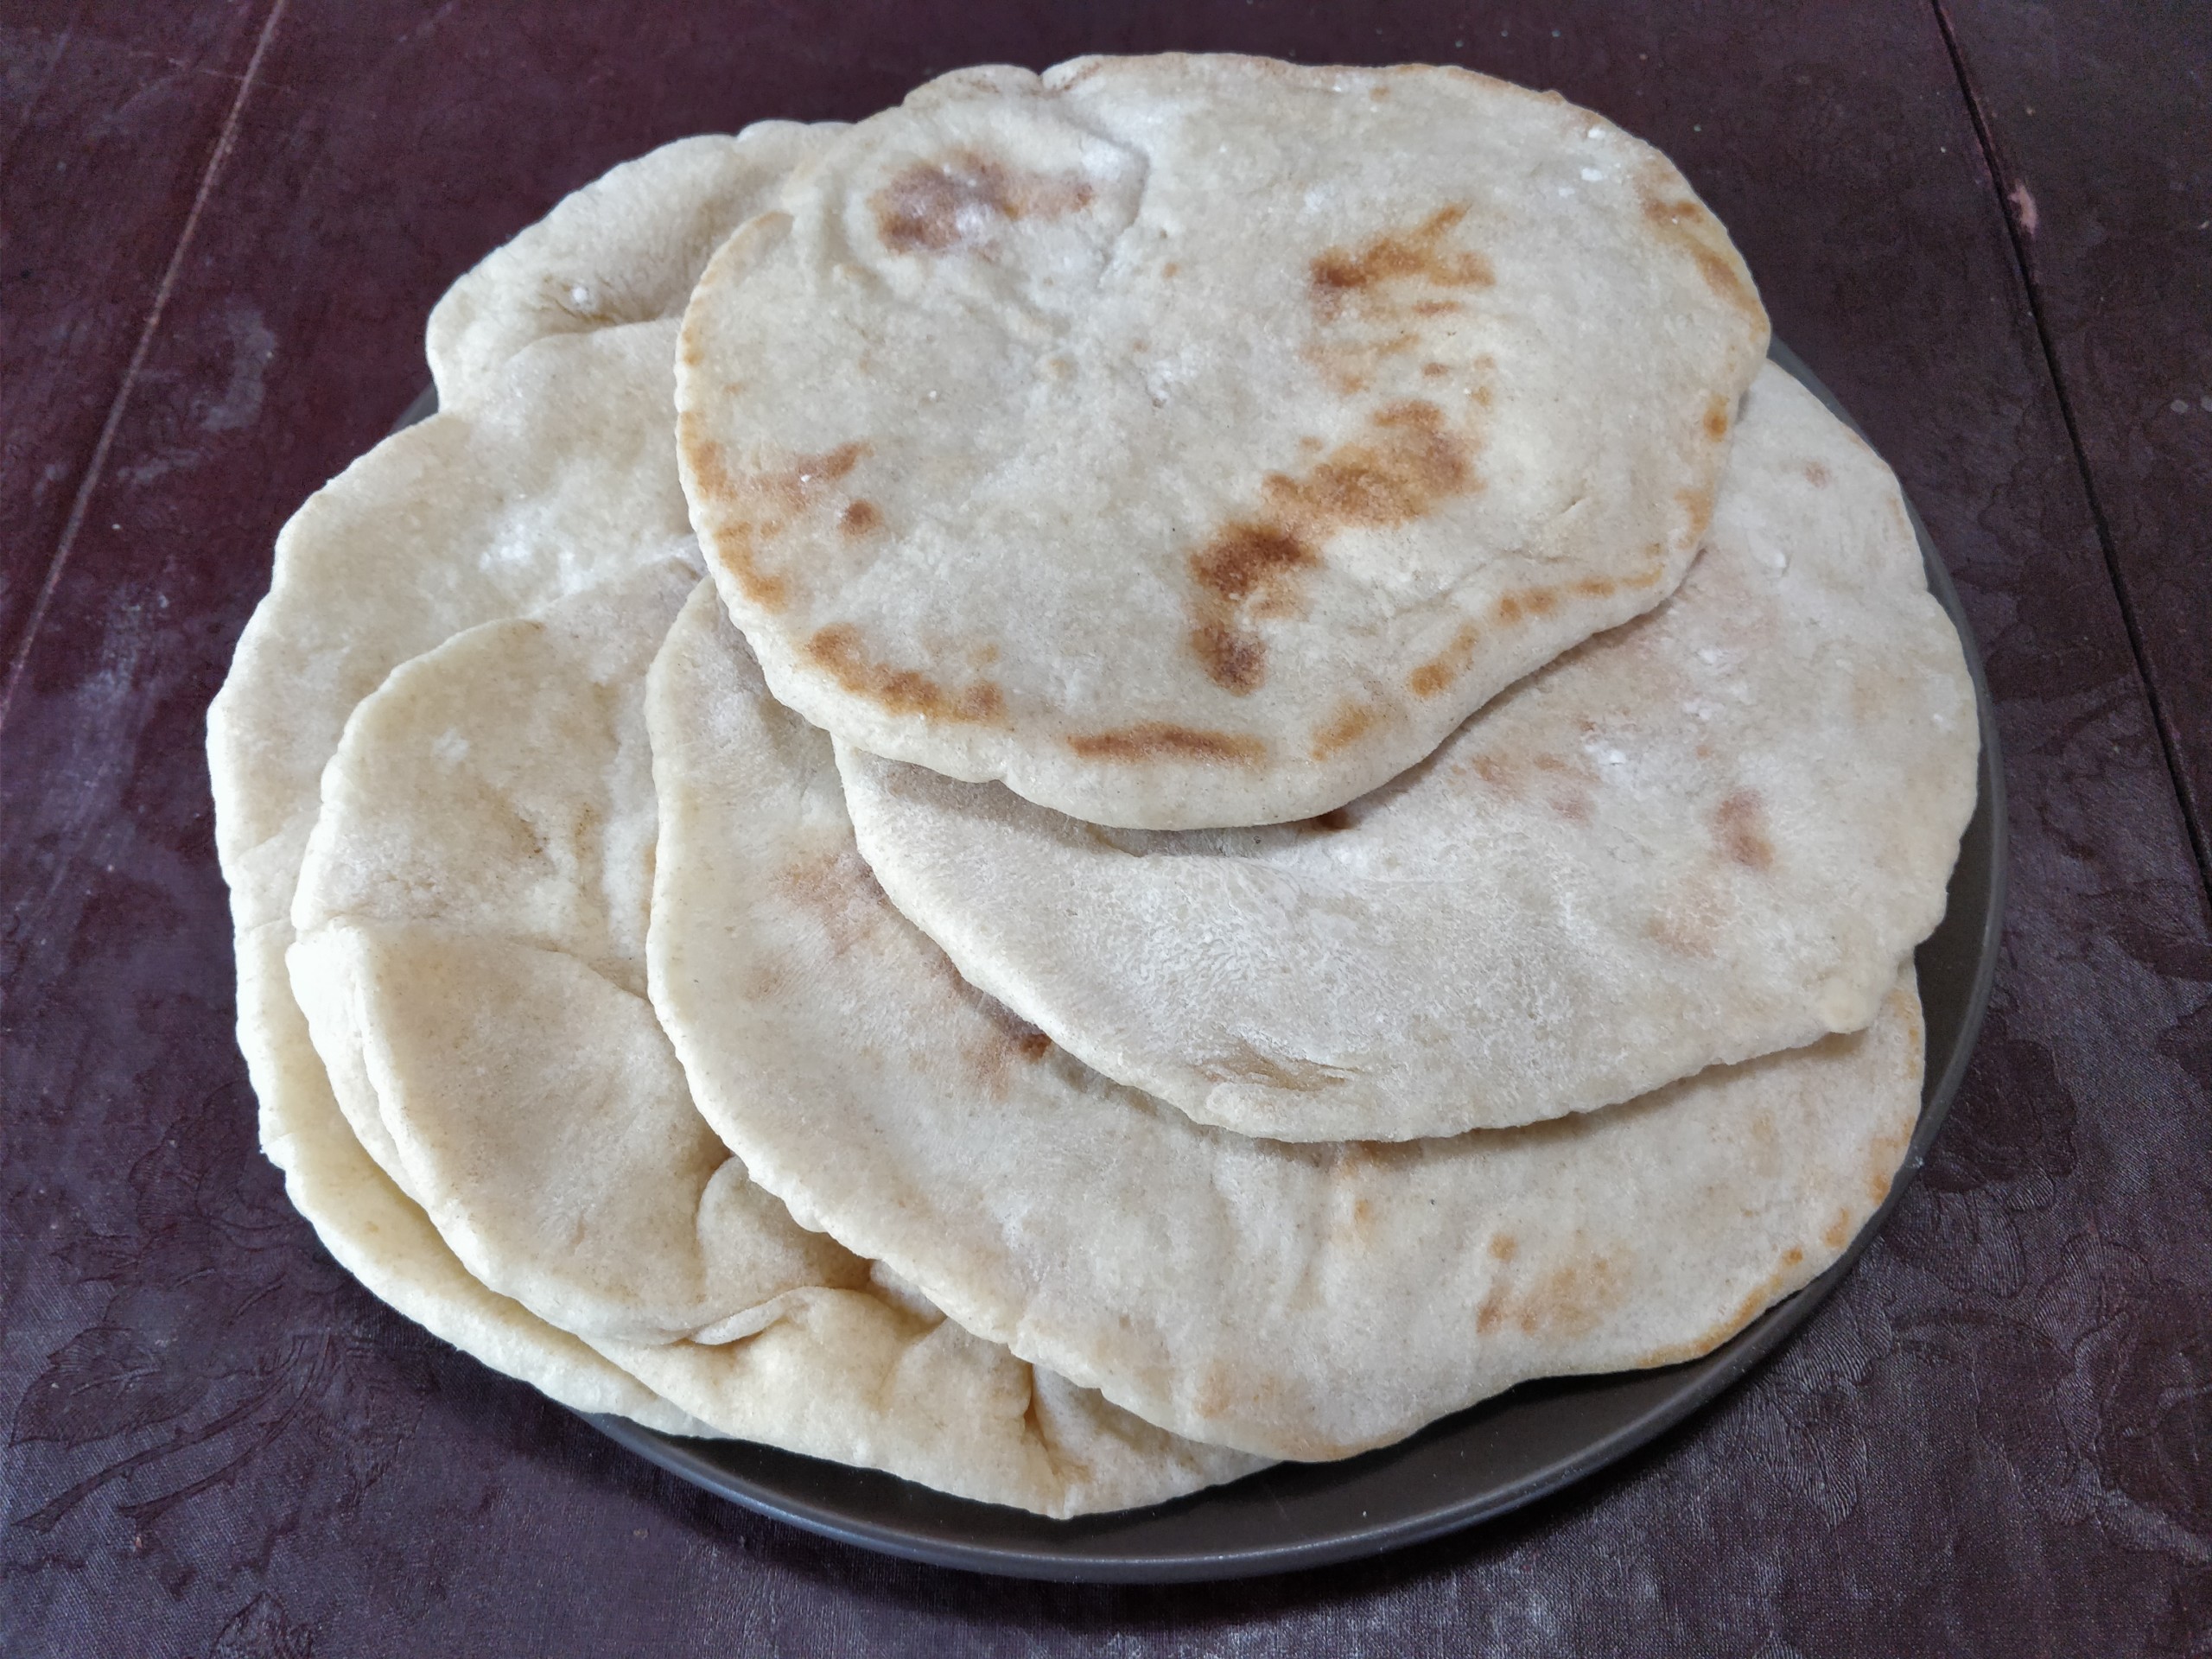 Pita breads stacked on a plate